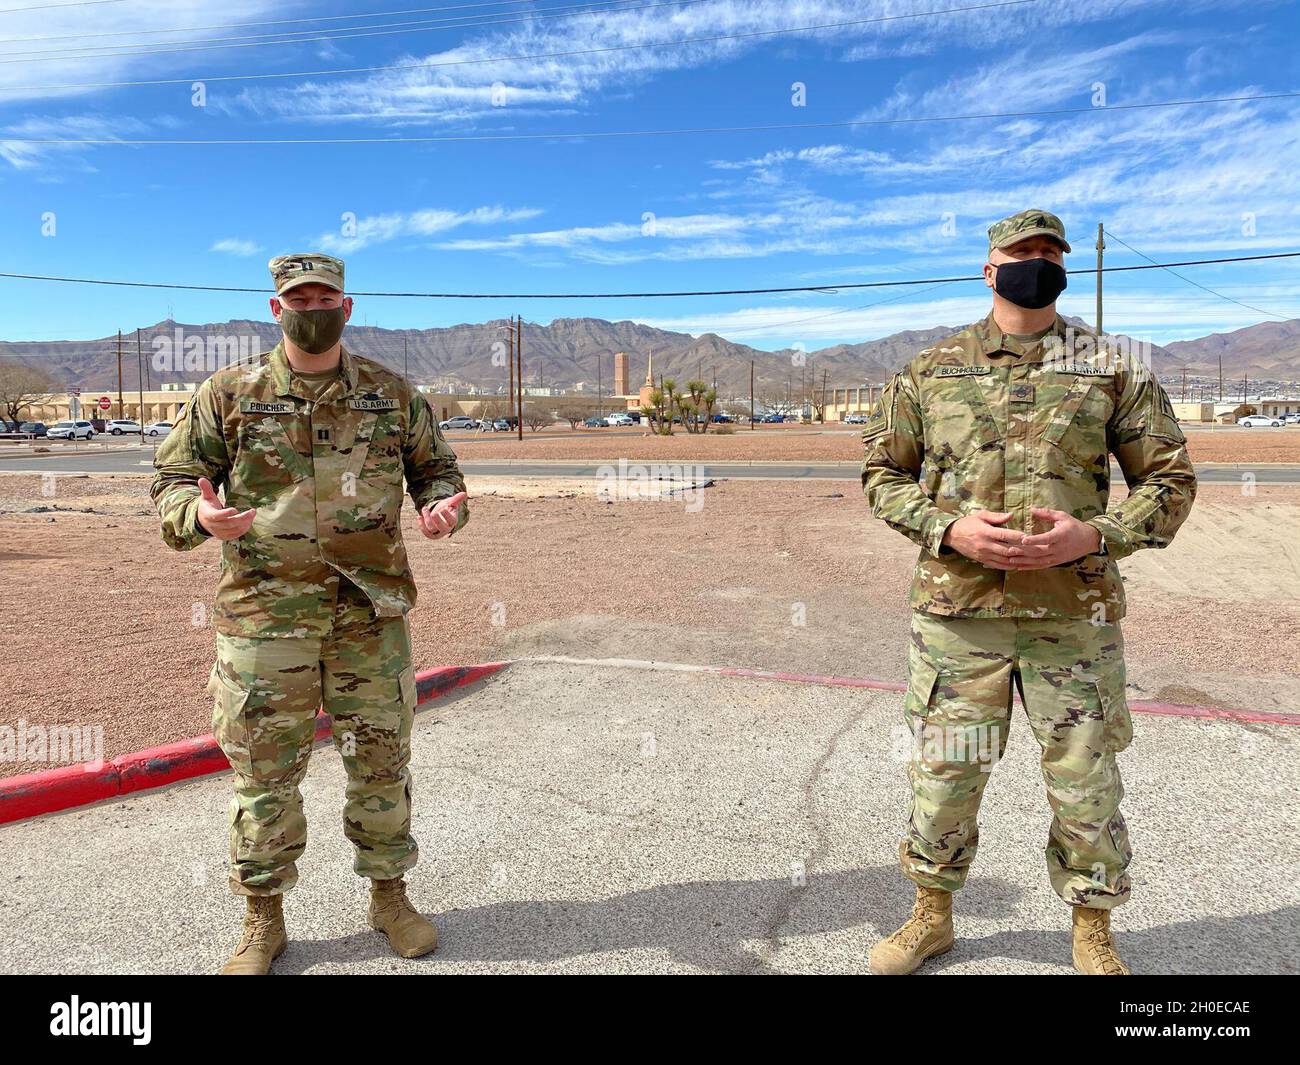 Capt. Mike Poucher (left) from Terry, Montana,  Commander of Detachment 2, of the U.S. Army Reserve's 7407th Troop Medical Clinic, and Staff Sgt. Daniel Buchholtz, a U.S. Army Reserve combat medic from Missoula, Montana, stand in front of a Soldier formation at West Ft. Bliss, Texas in February 2021. Poucher and Buchholtz are two of 35 Army Reserve Medical Command Soldiers from the 7407th Troop Medical Clinic that have mobilized to support COVID-19 isolation and quarantine missions in Texas and New Mexico. Stock Photo